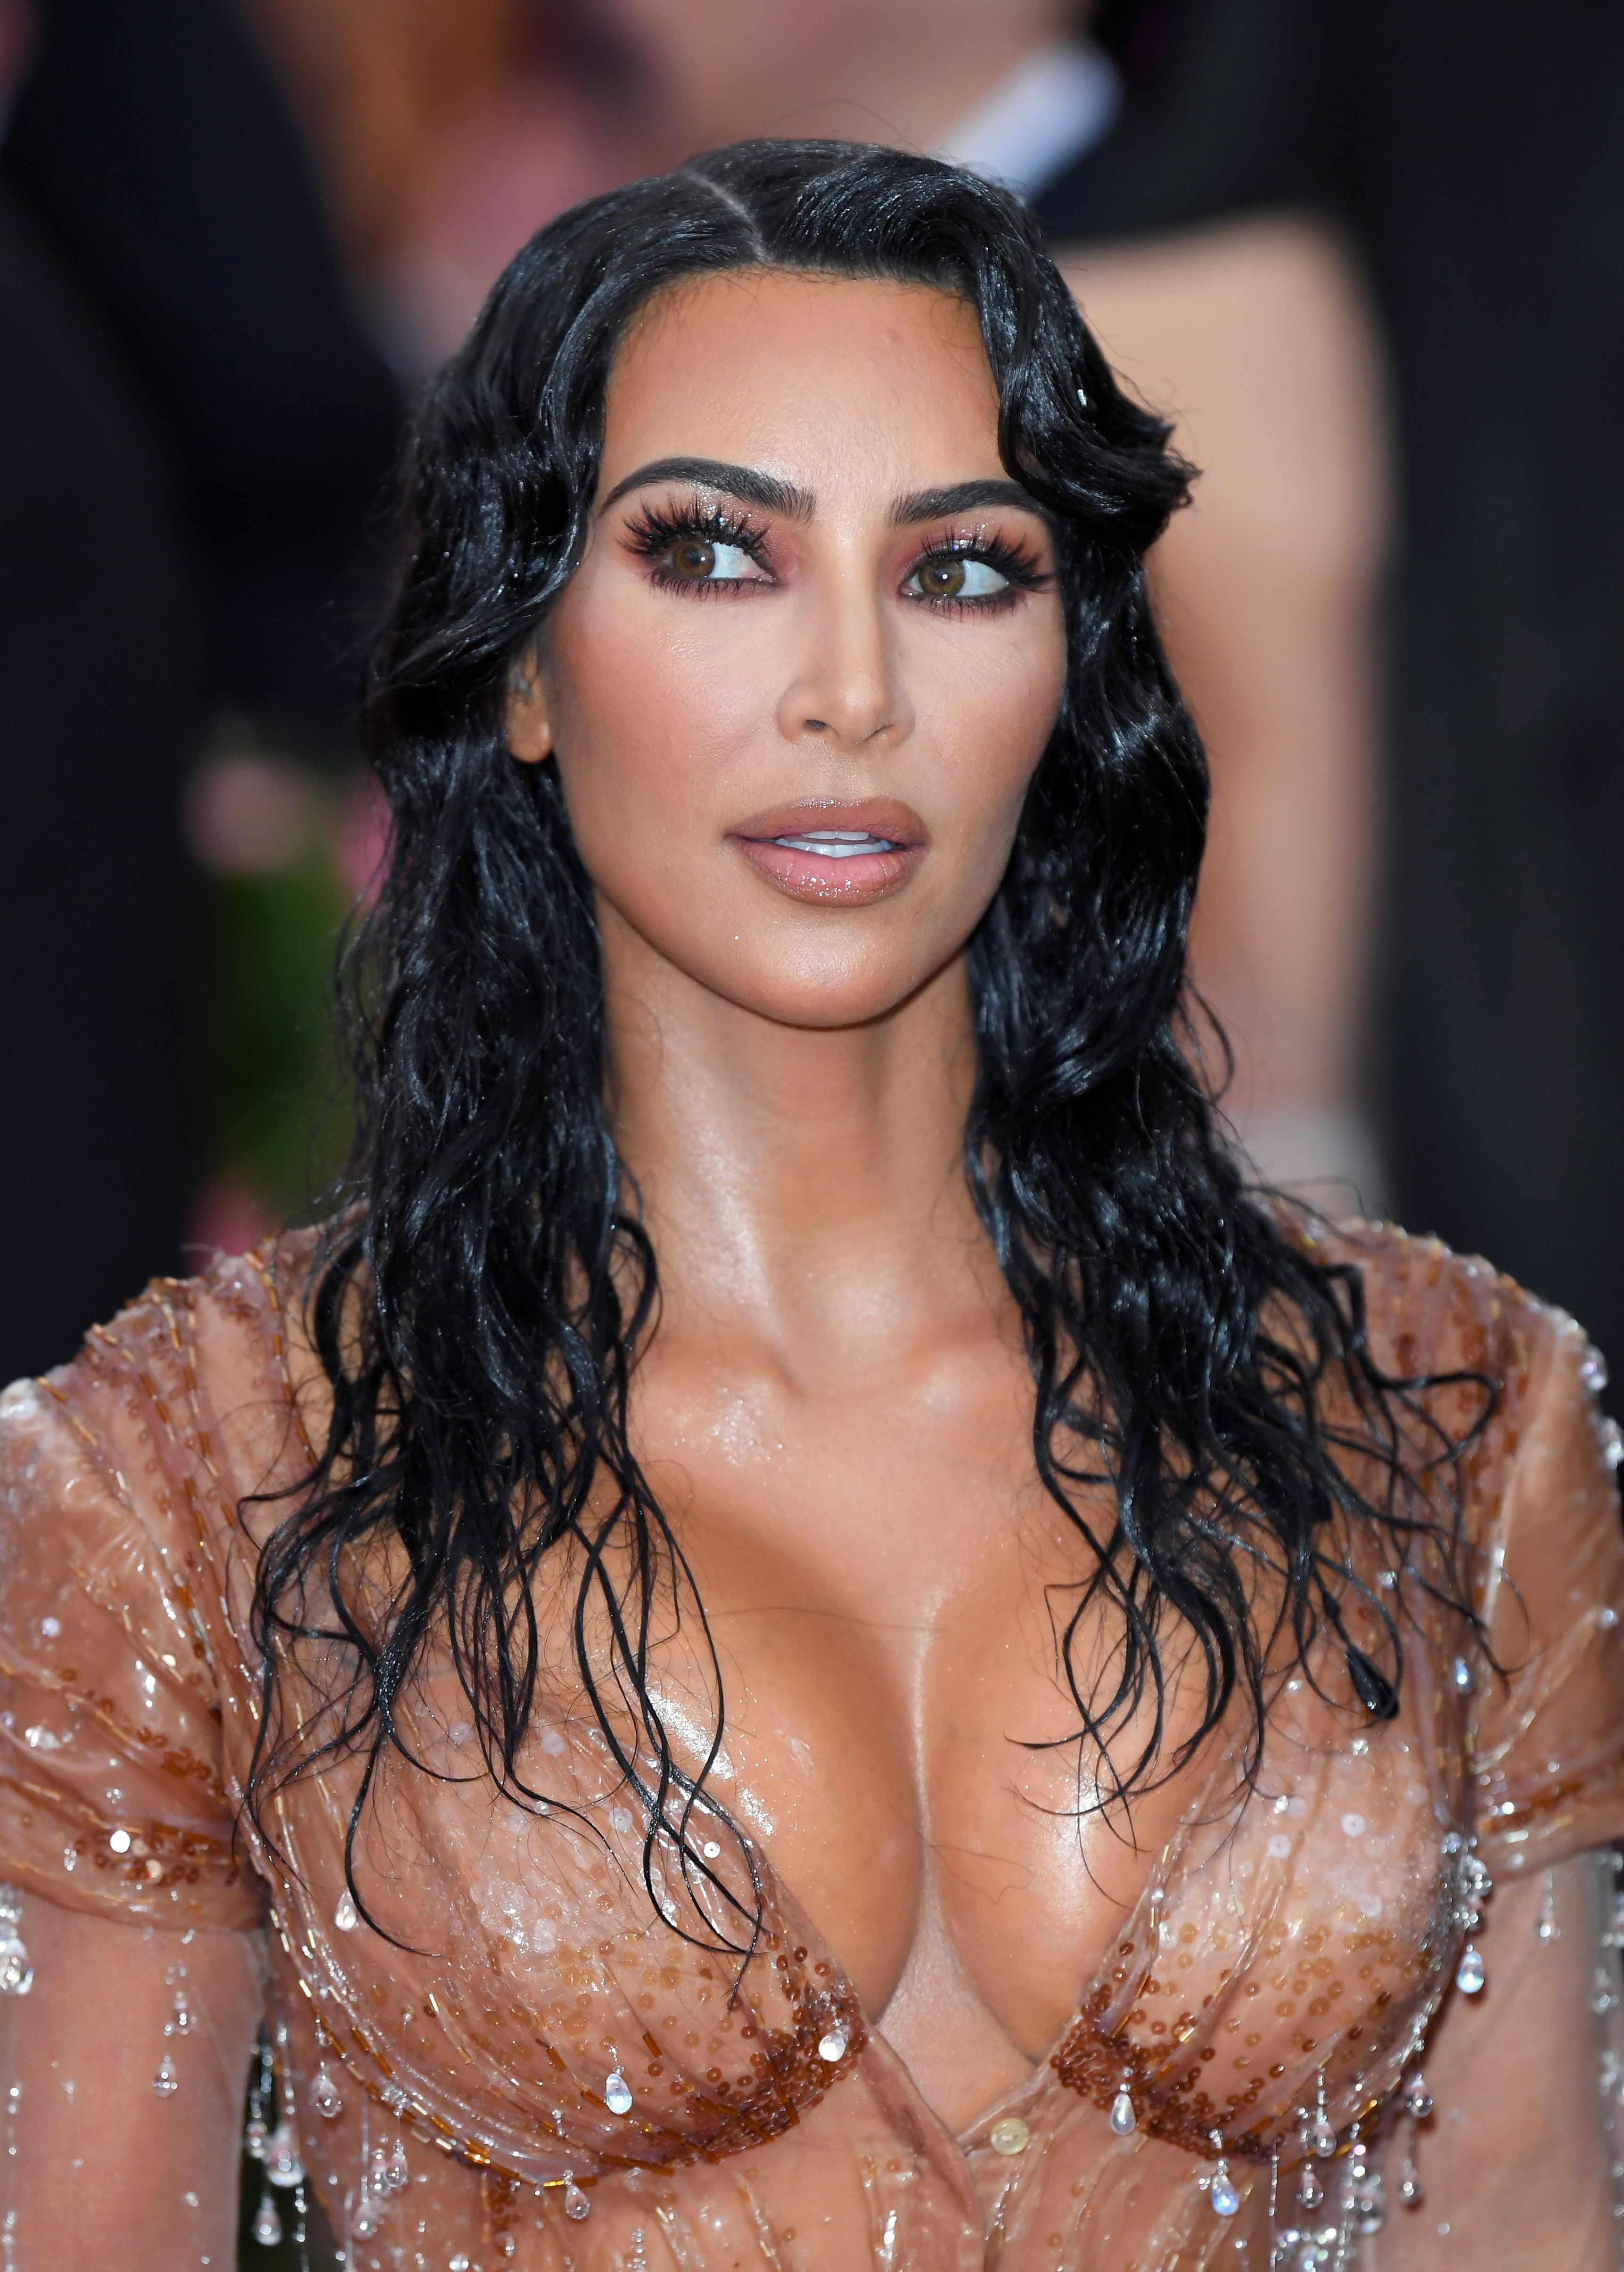 Kim Kardashian West at the 2019 Met Gala in New York | Source: Getty Images